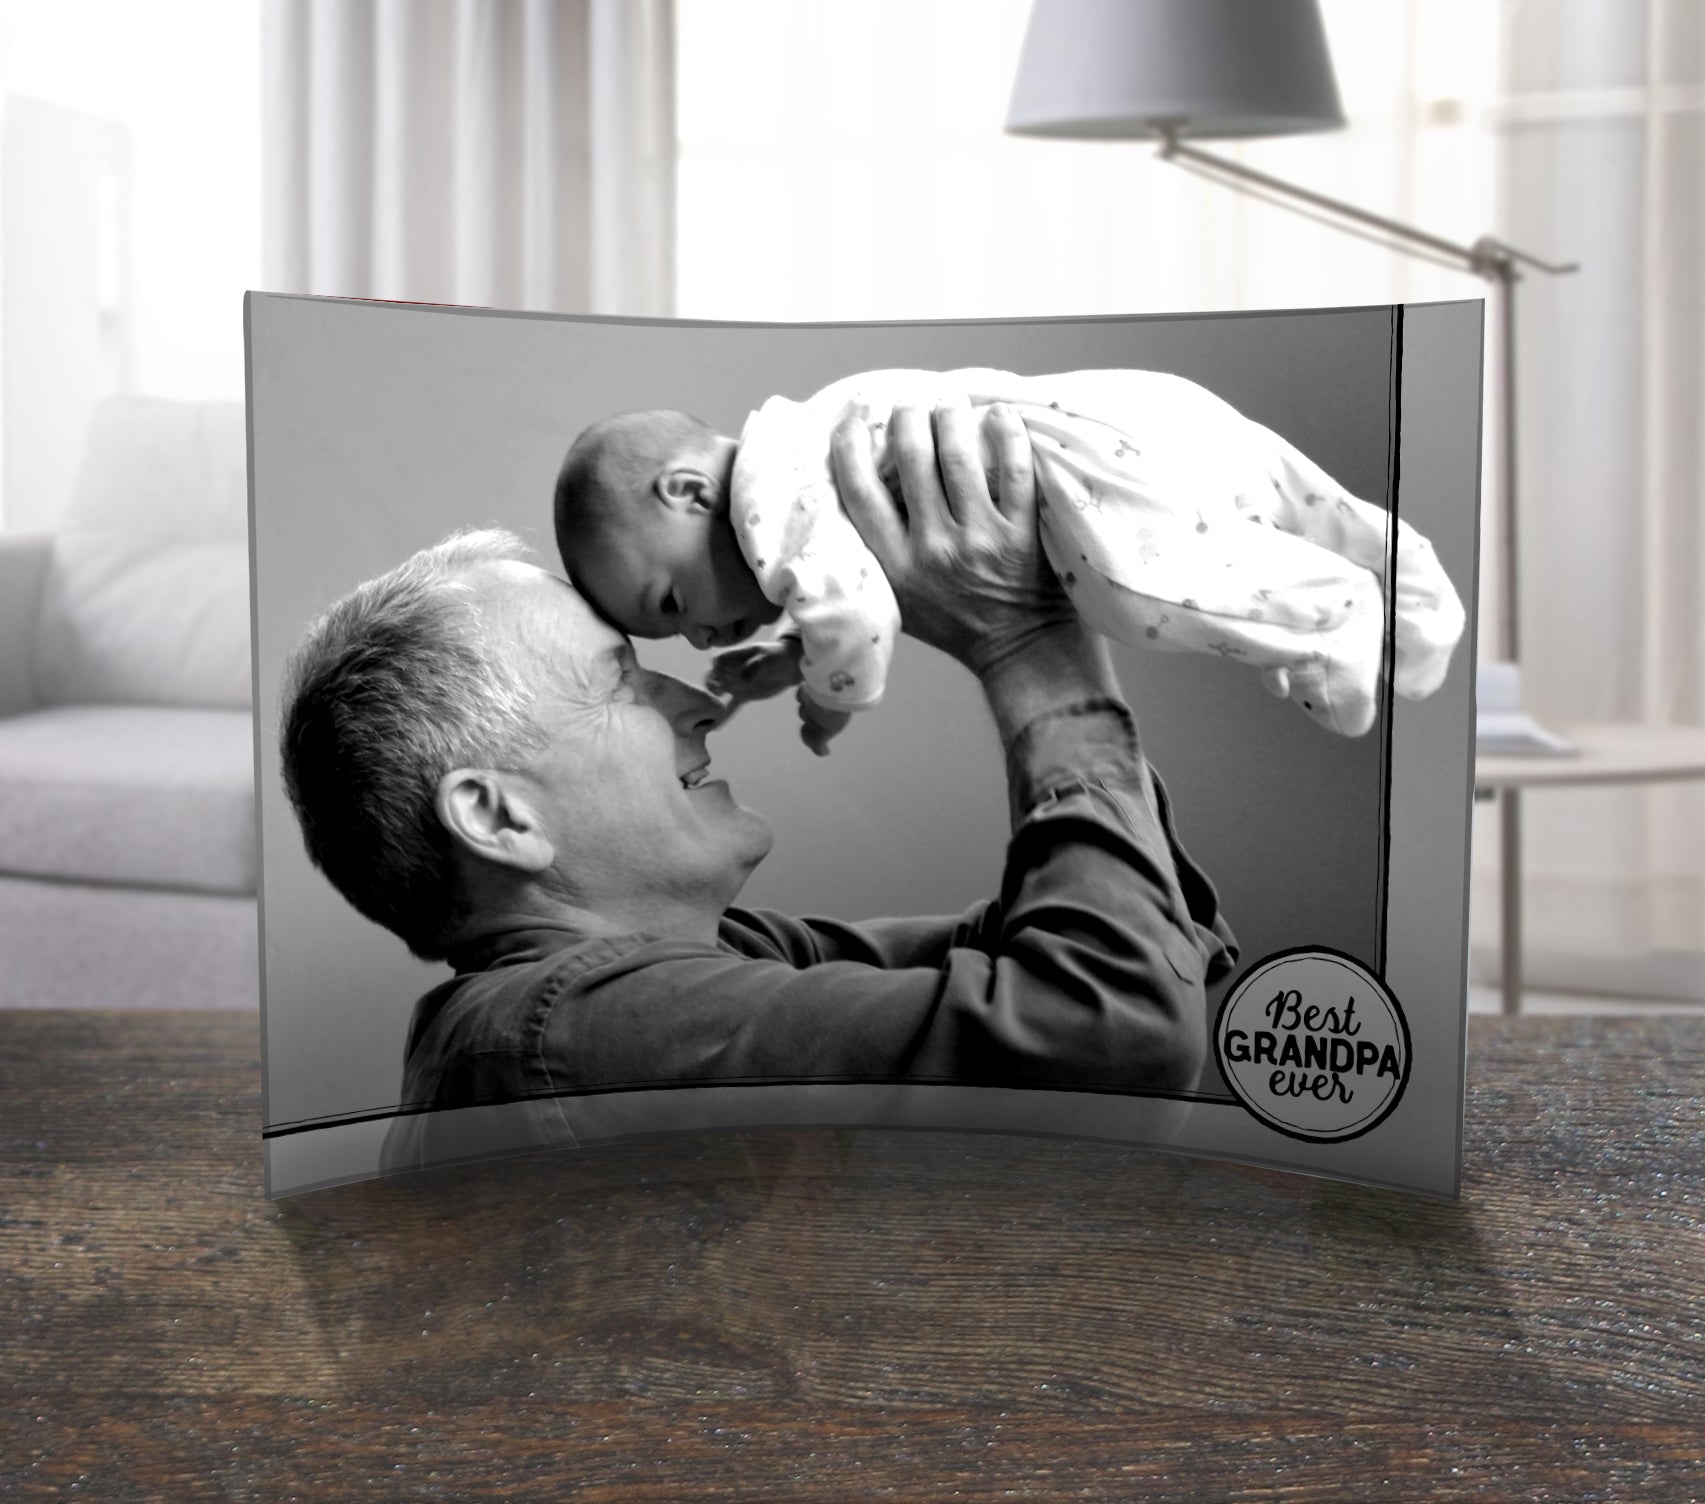 Father's Day Collection (Best Grandpa Ever - Personalized)  10" x 7" Curved Acrylic Print